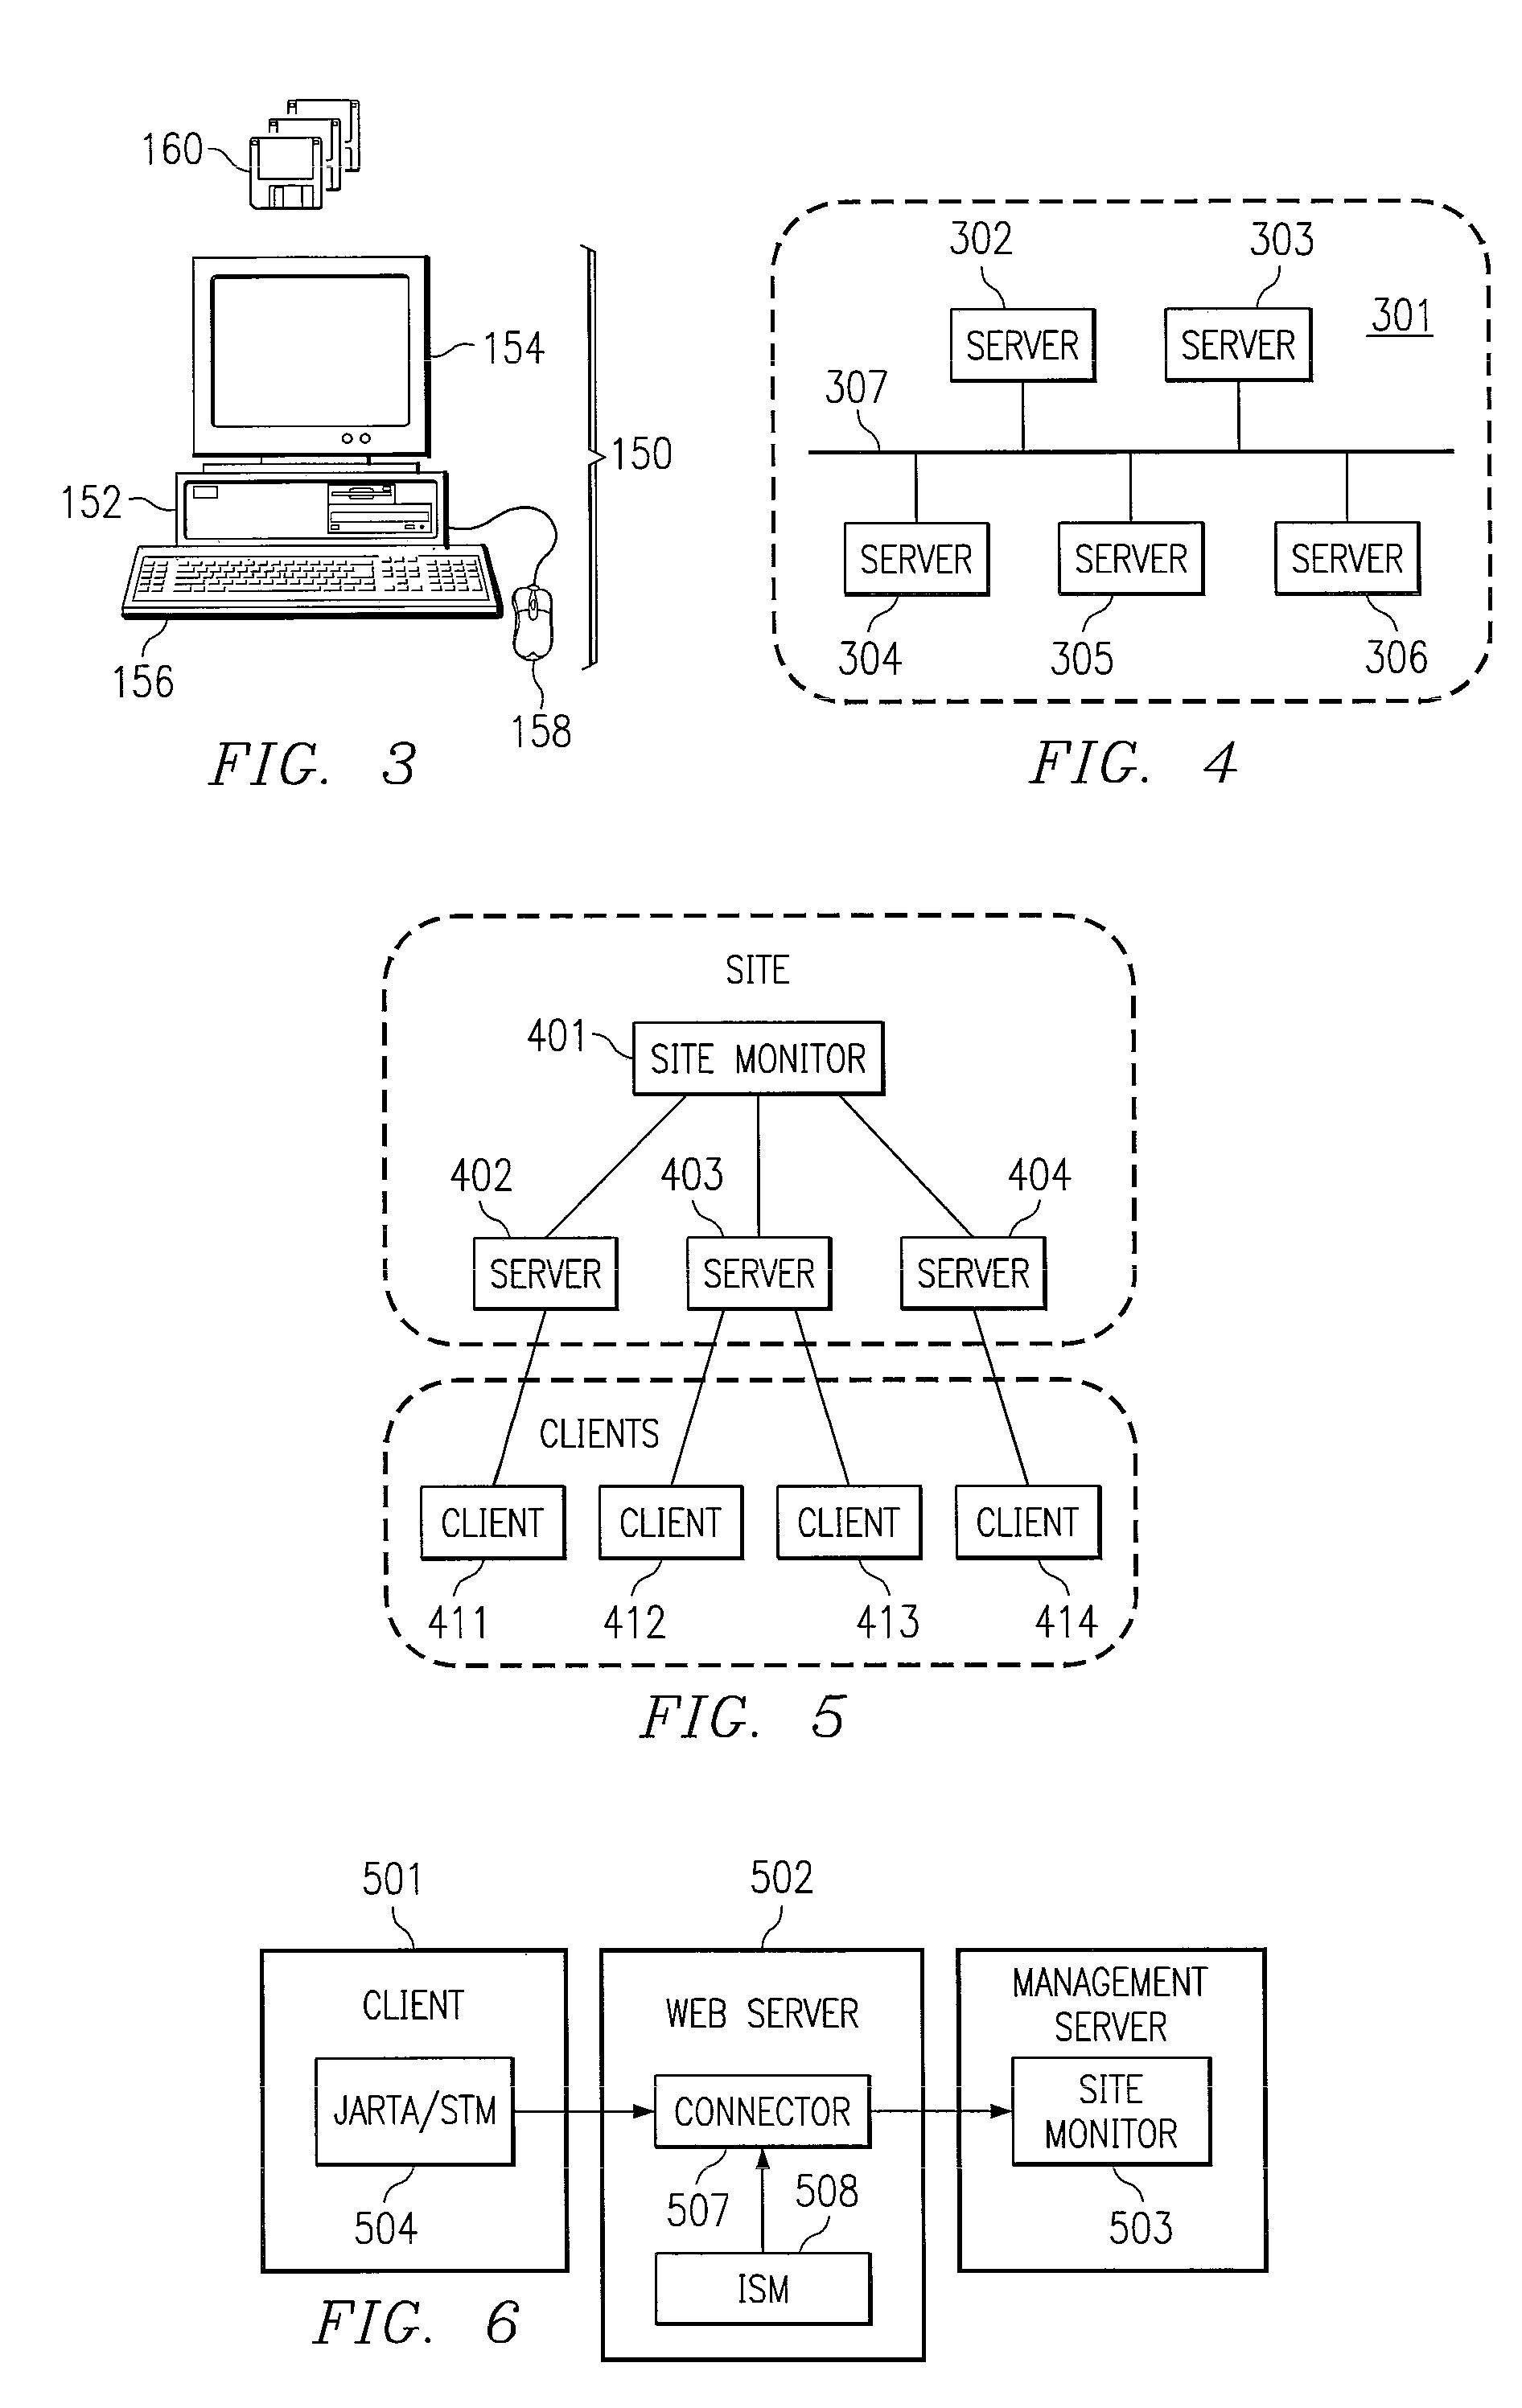 Synthetic transaction monitor with replay capability